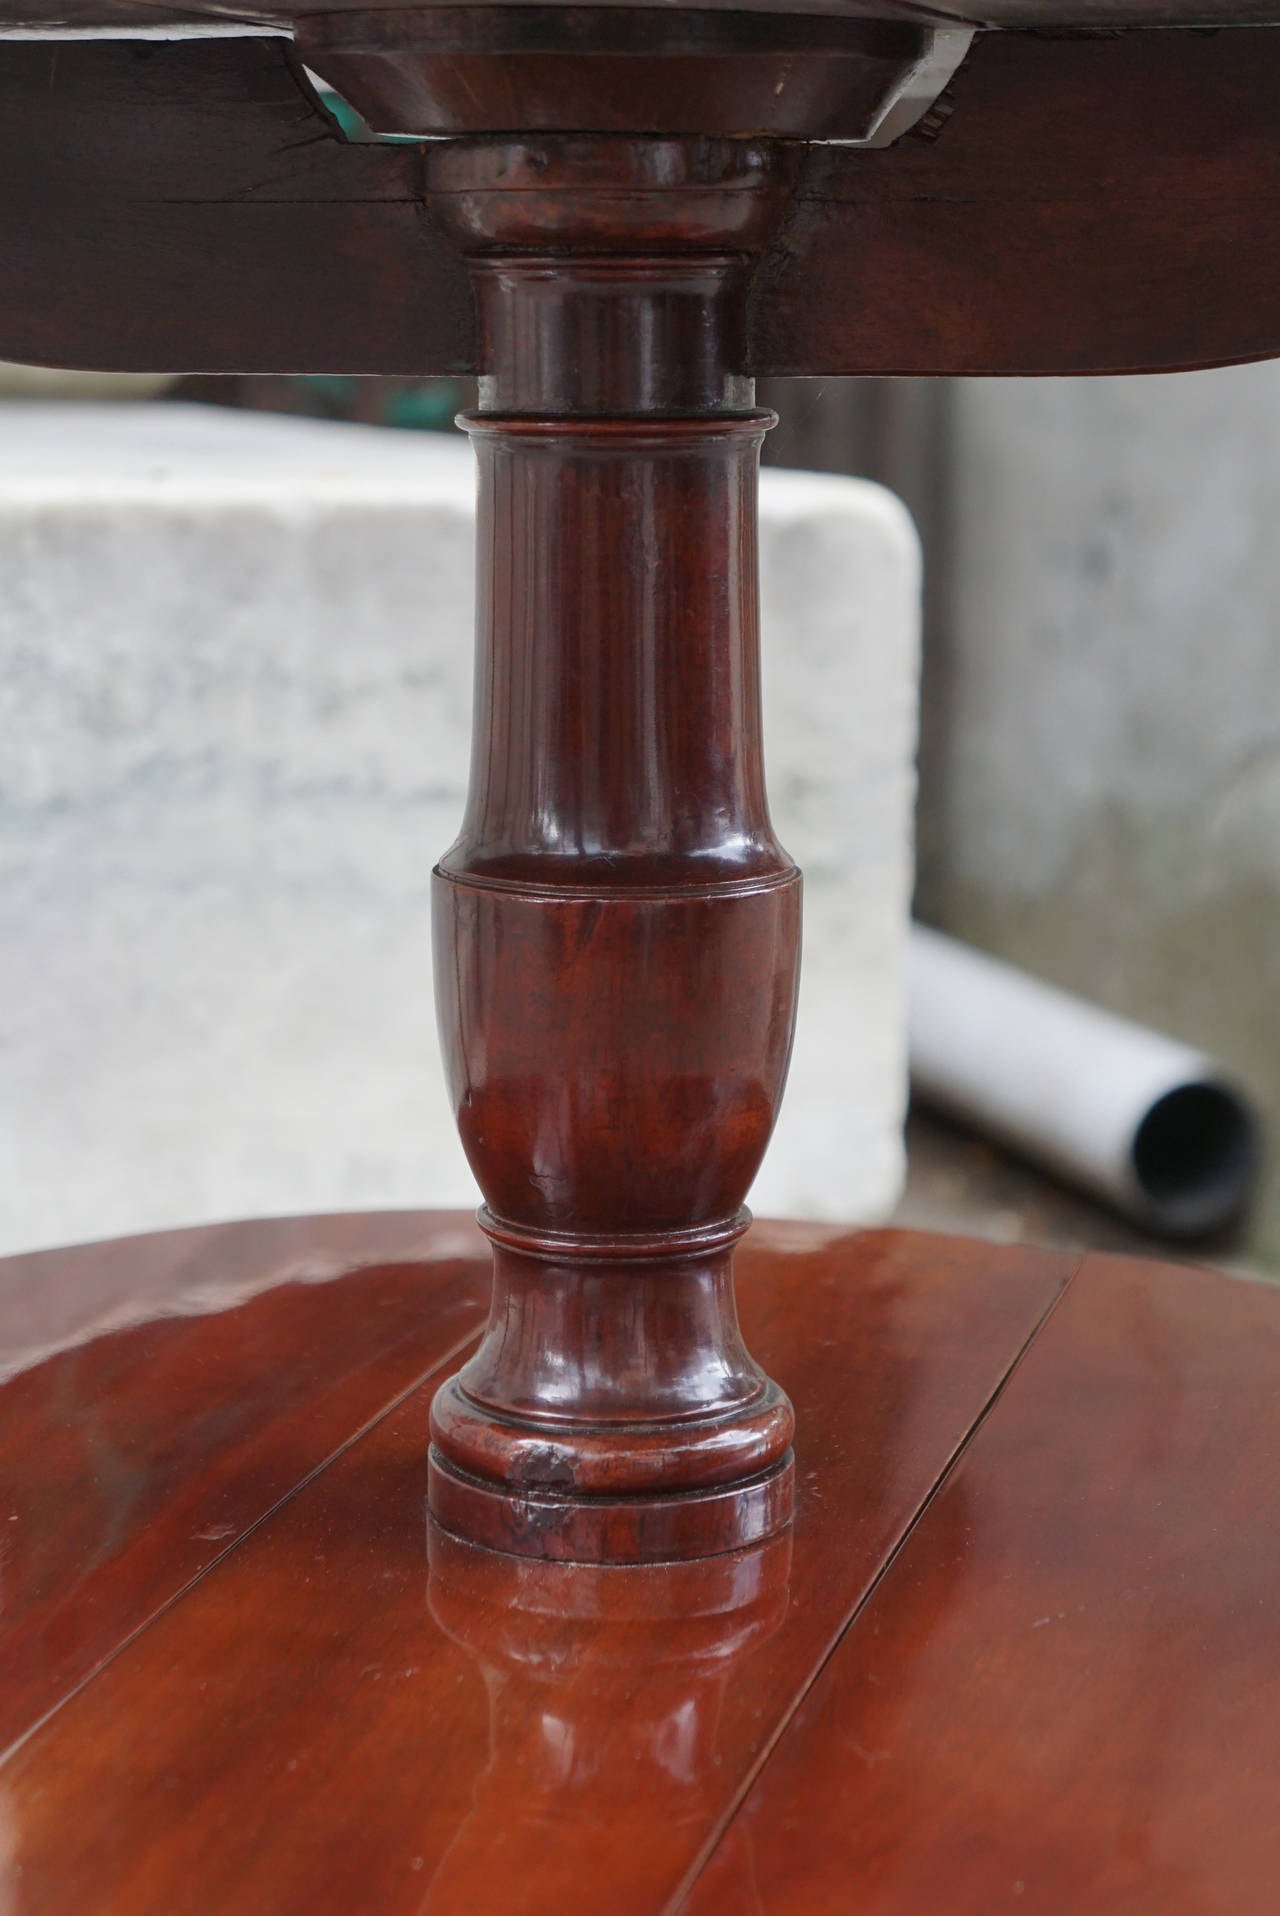 This piece made in England, circa 1770 is of an unusual size and with the added feature of folding drop leaves. Made from solid mahogany without veneers the piece is heavy and mannish with a deep rich color to the wood. The table is accented with